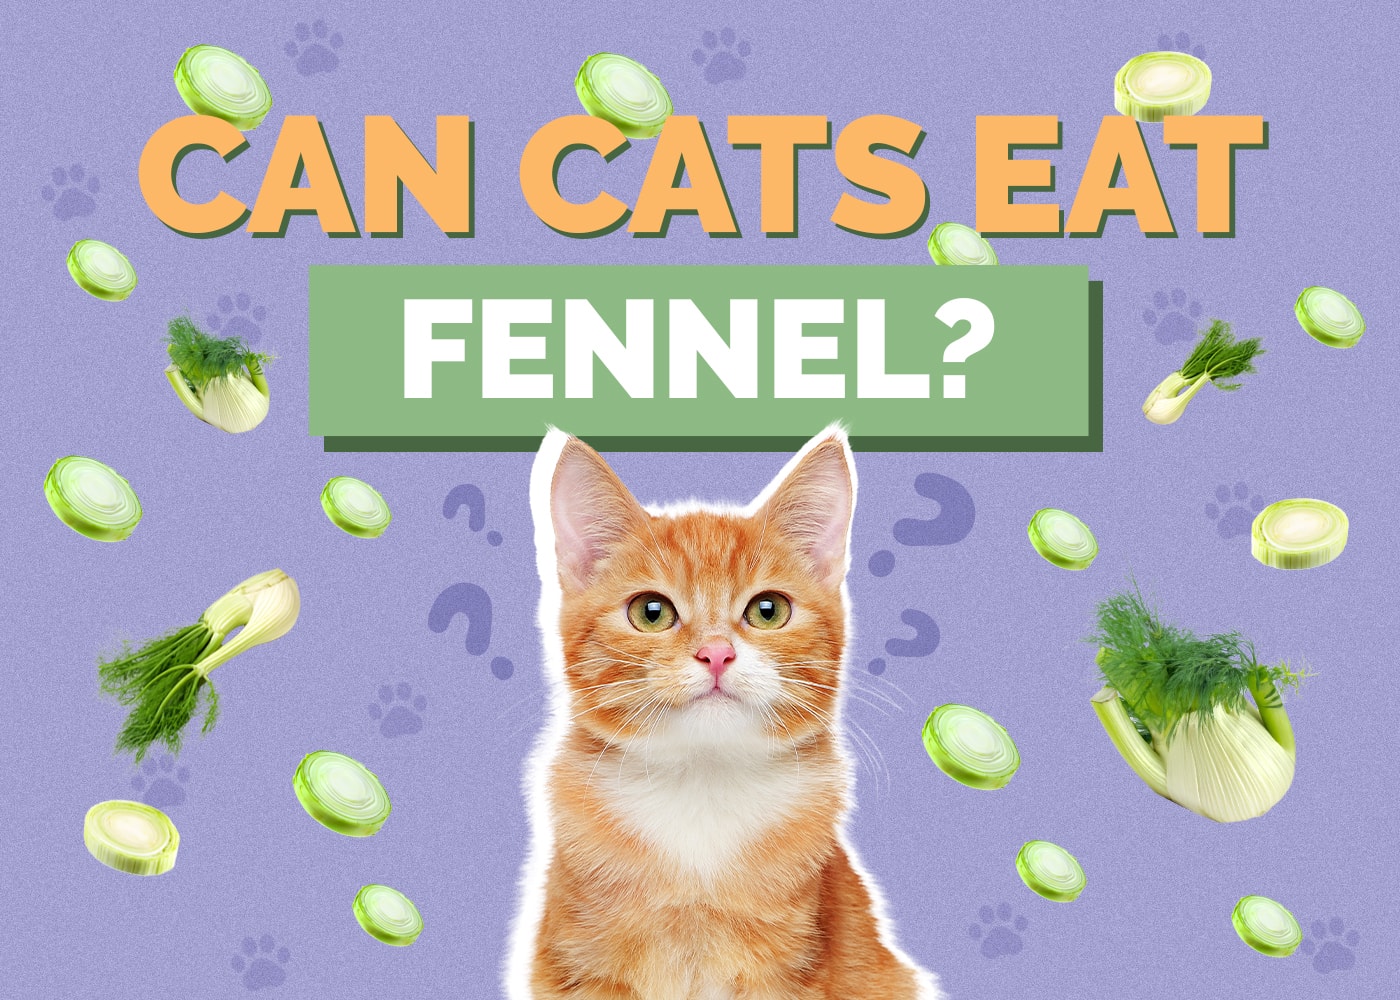 Can Cats Eat fennel